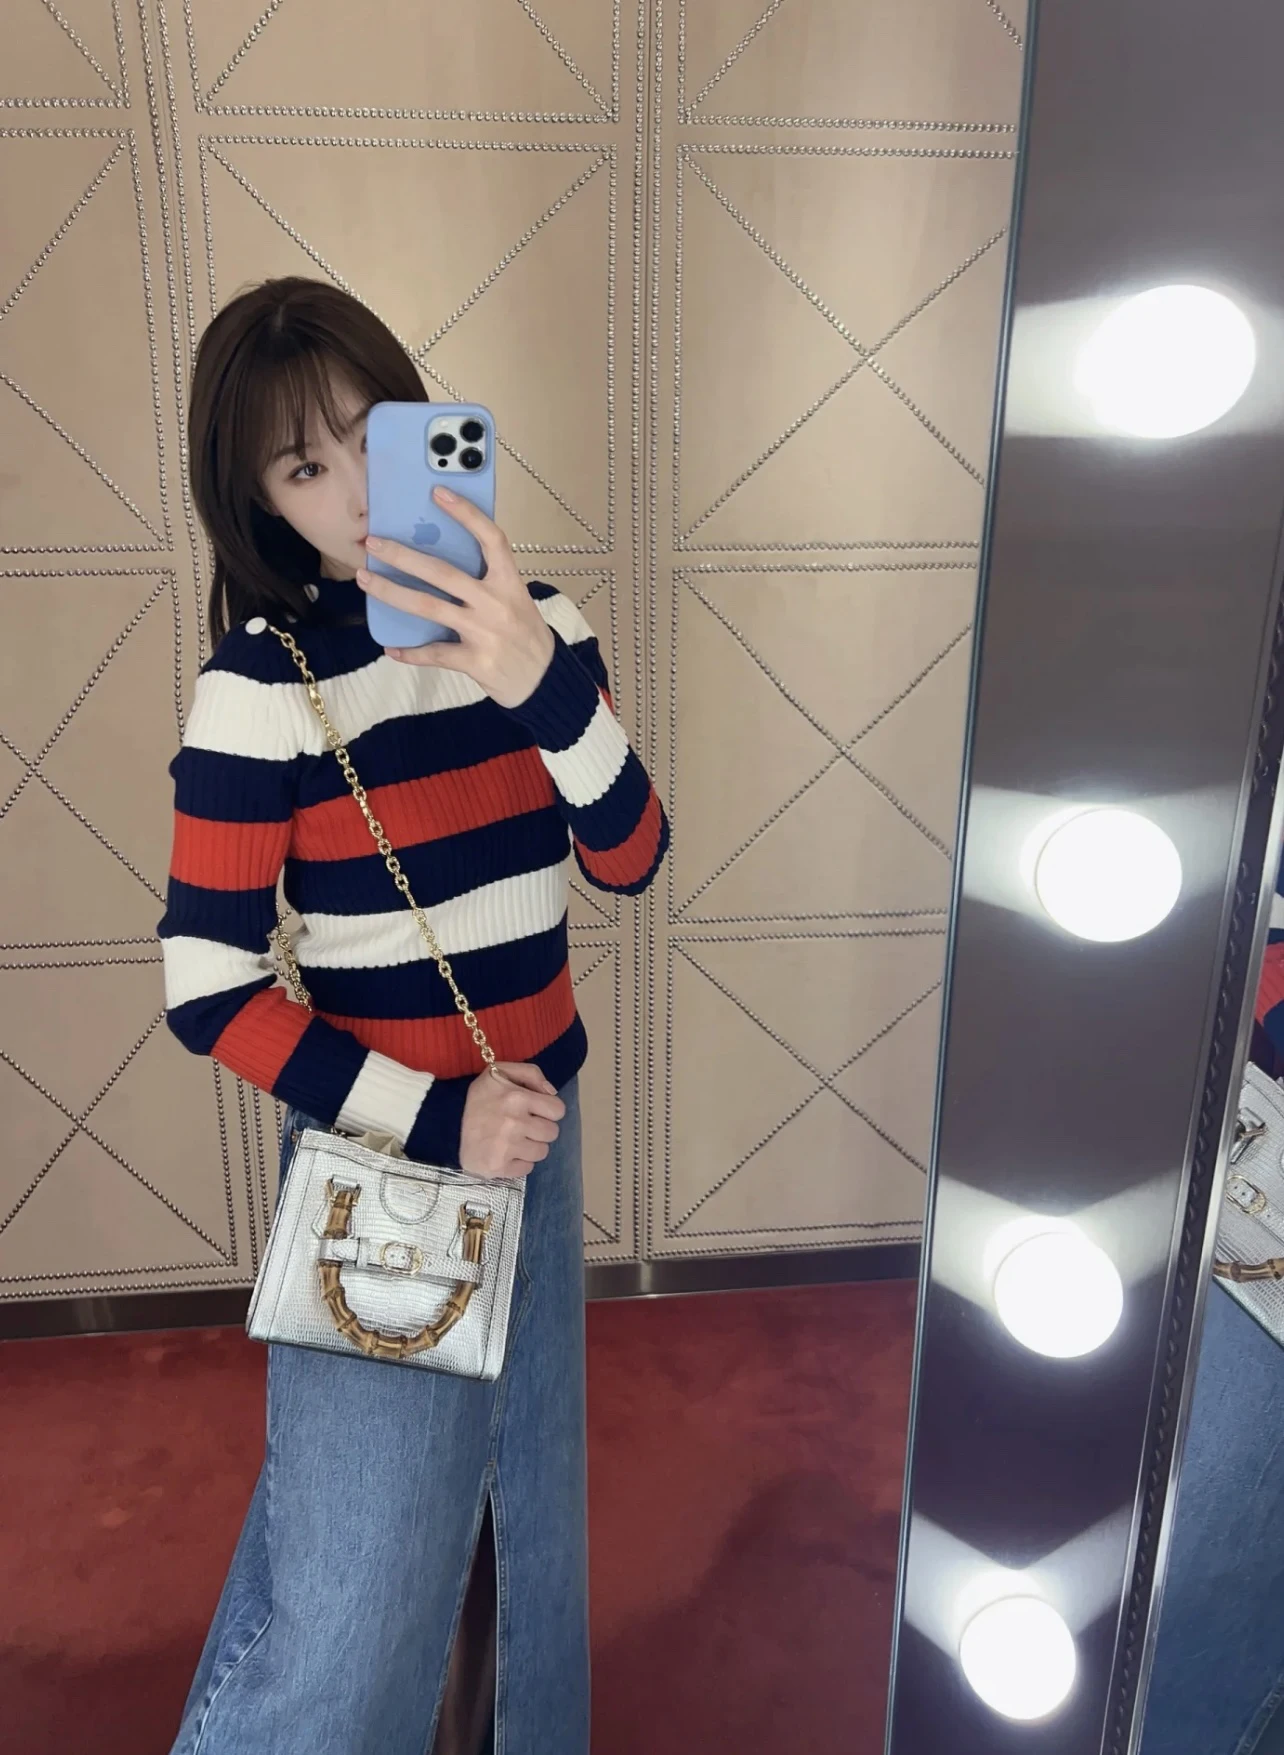 

Women Autumn Winter New Contrast Color Striped Knitted Cashmere Sweater Female Long Sleeve Slim Pullovers Knitwear Jumper G597